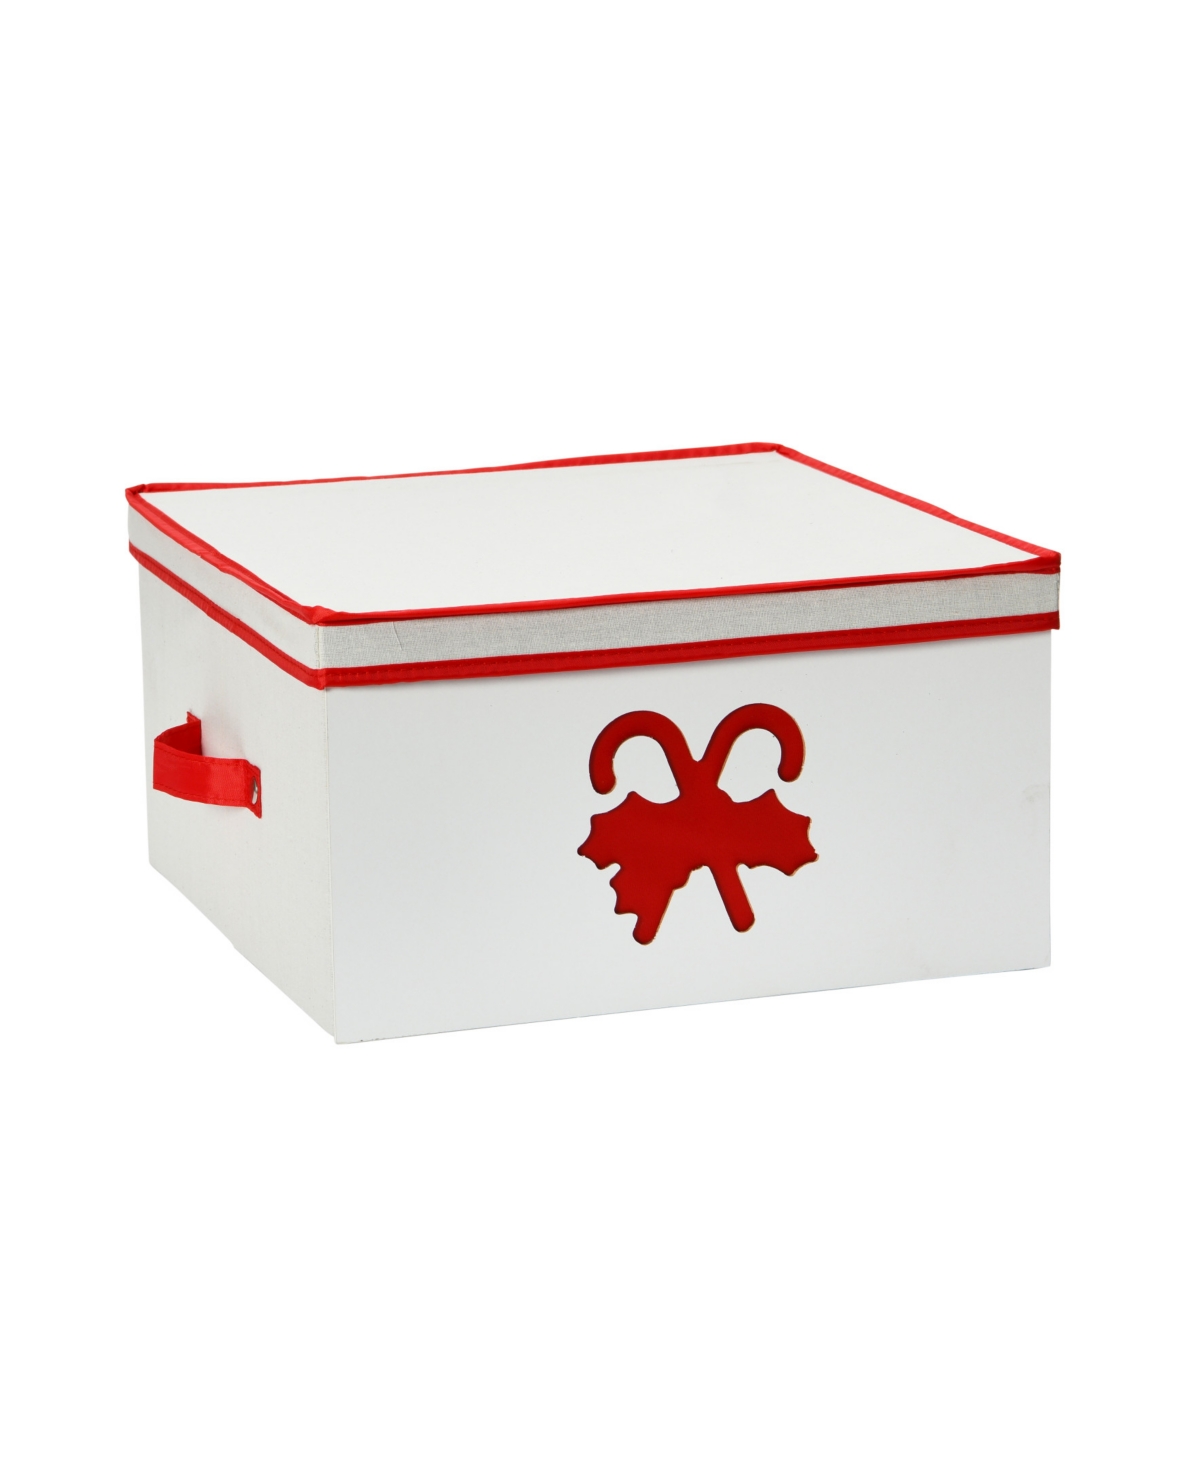 Holiday Box, Large Red Candy Cane - Cream